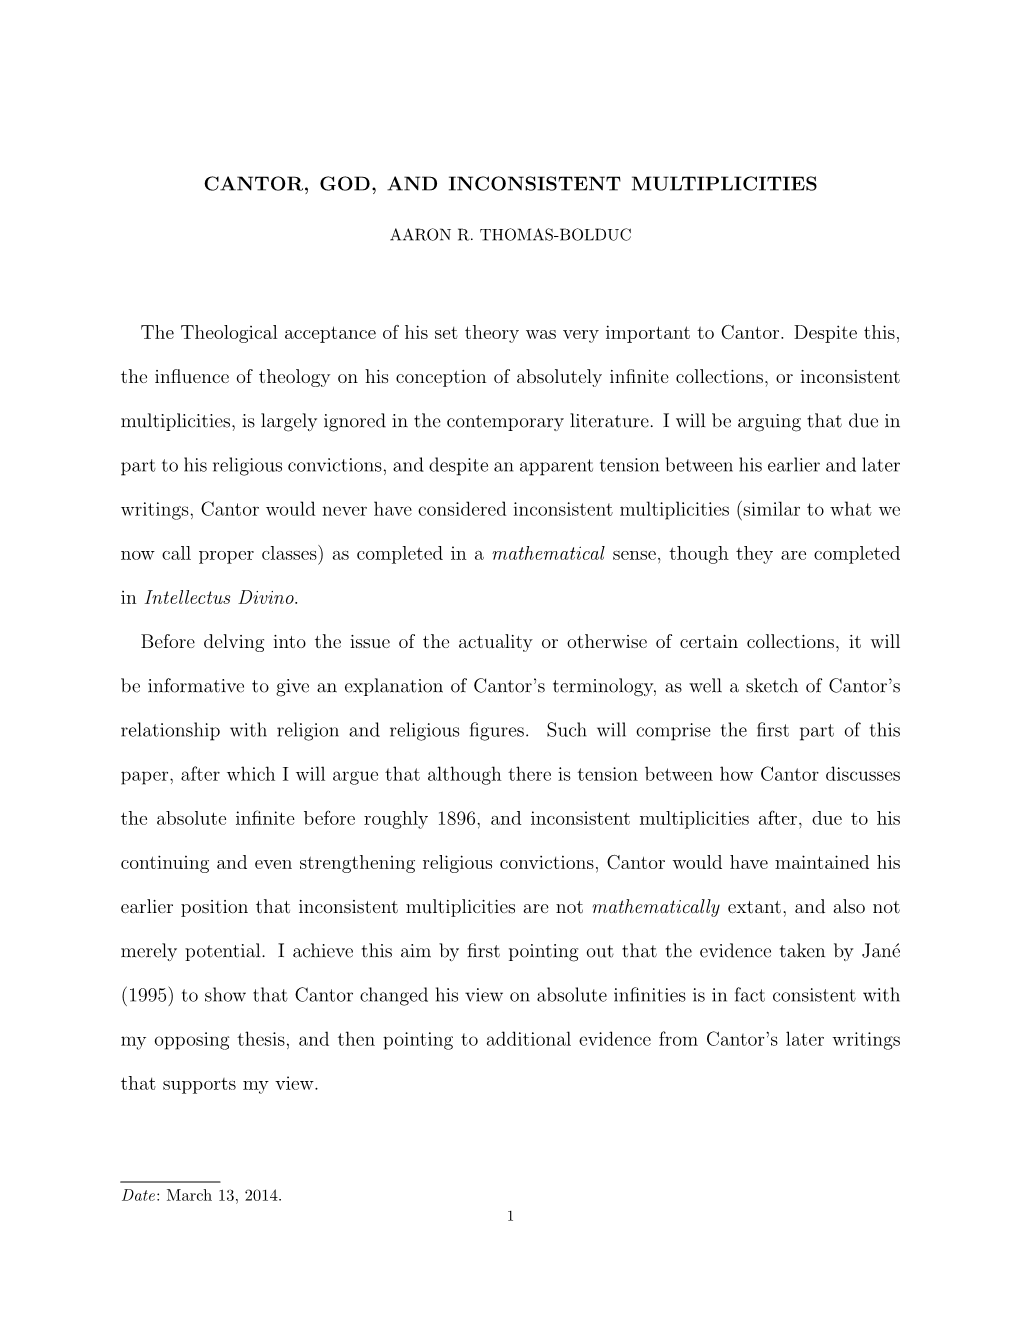 CANTOR, GOD, and INCONSISTENT MULTIPLICITIES the Theological